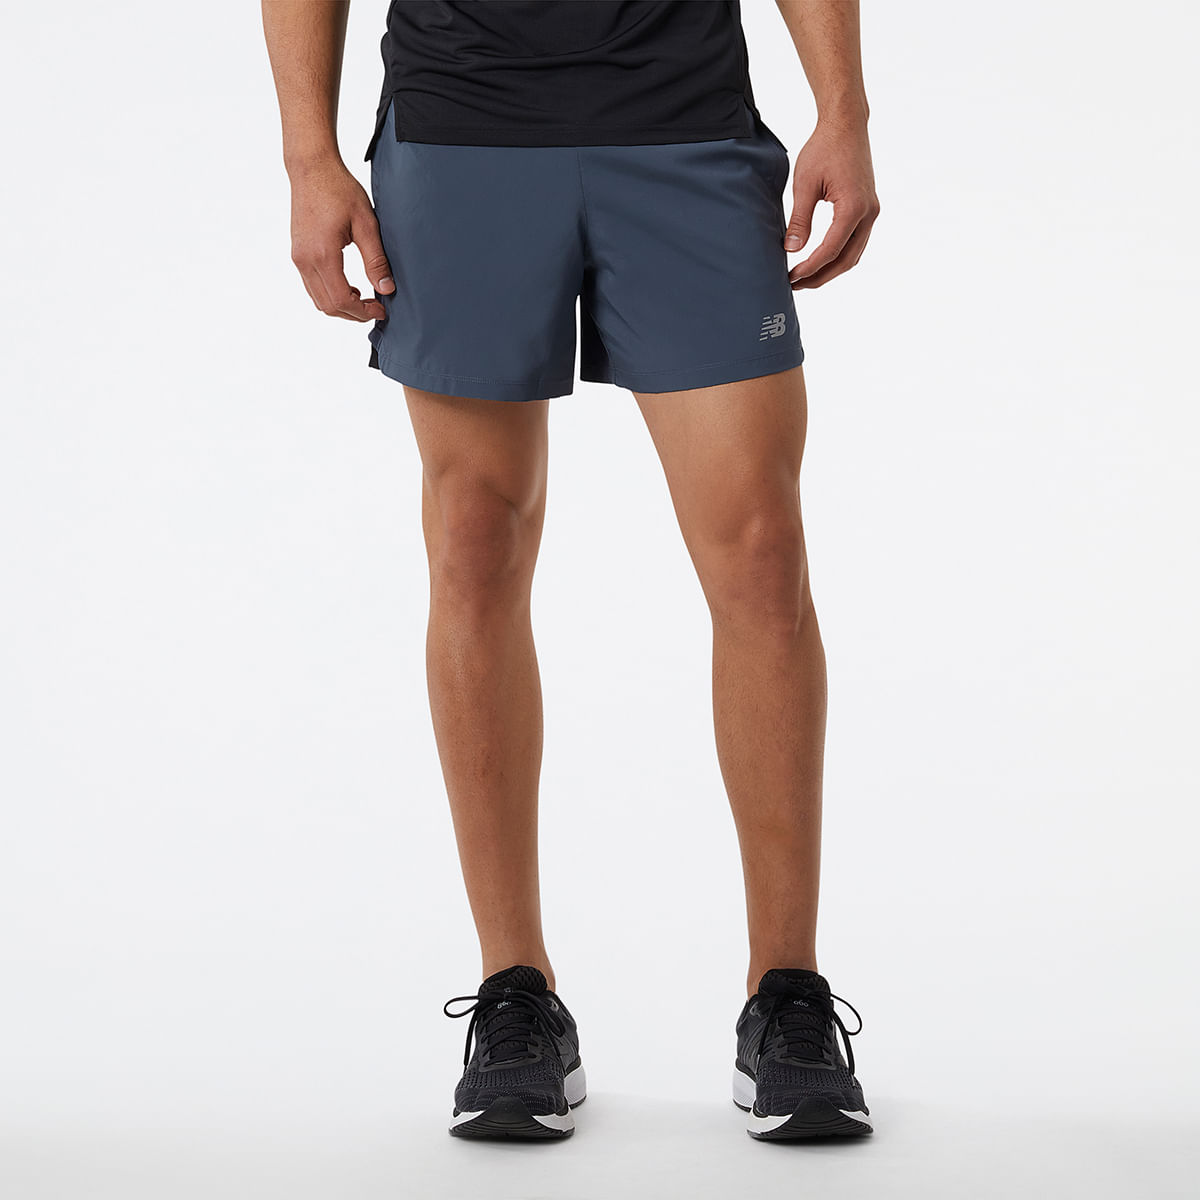 Shorts New Balance Accelerate 5 Masculino - Grafite - Joinville Sportcenter